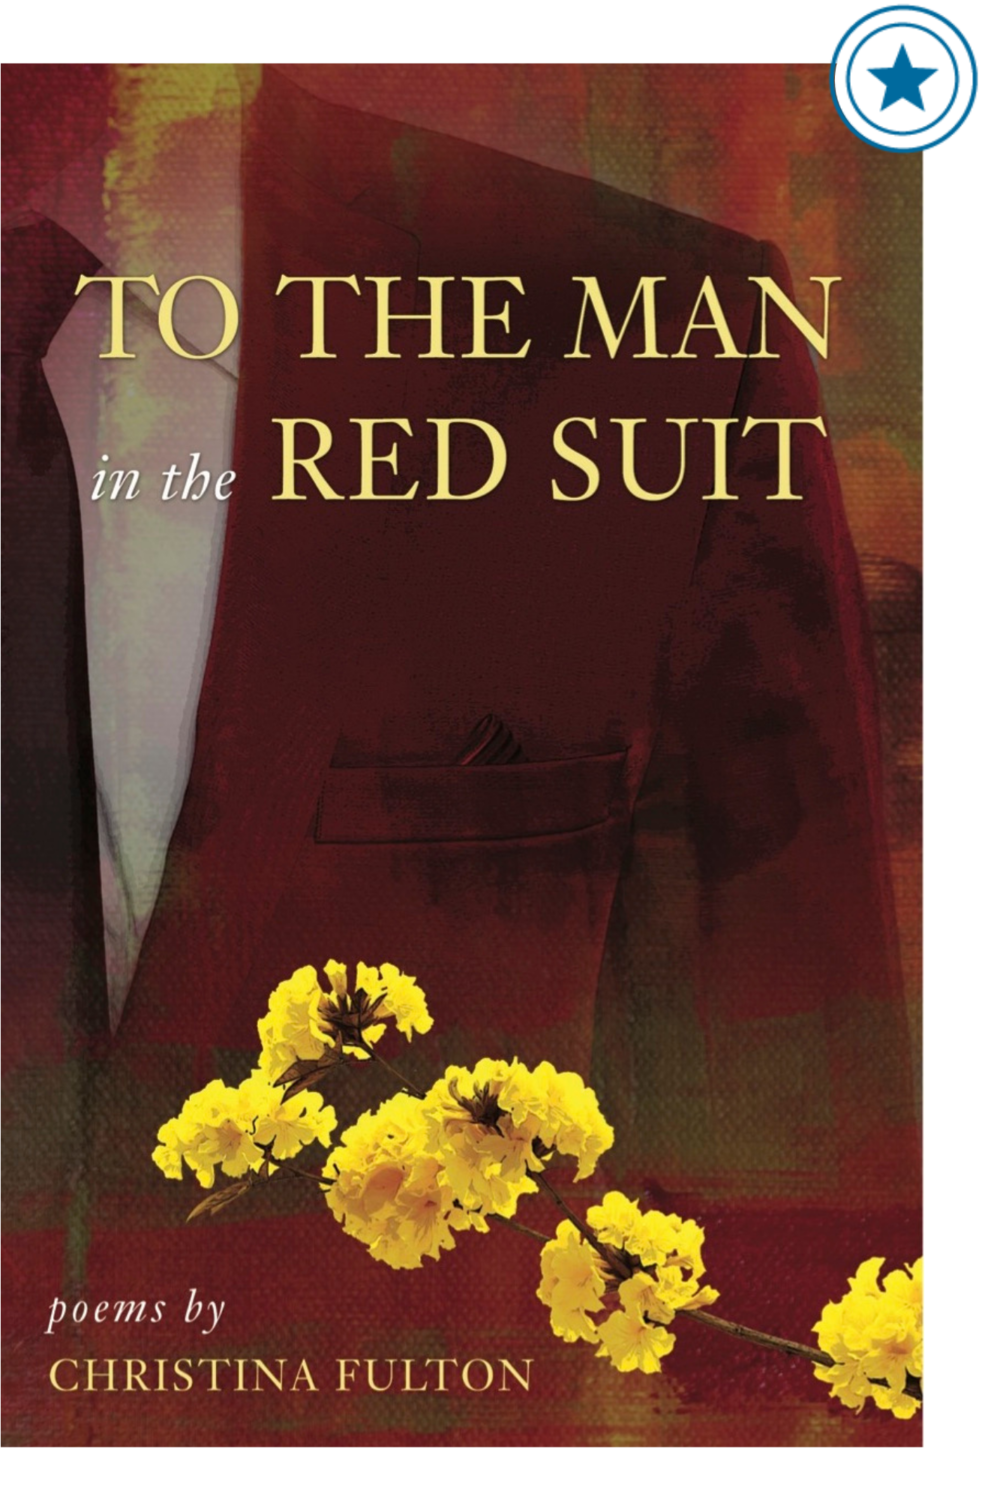 To the Man in the Red Suit